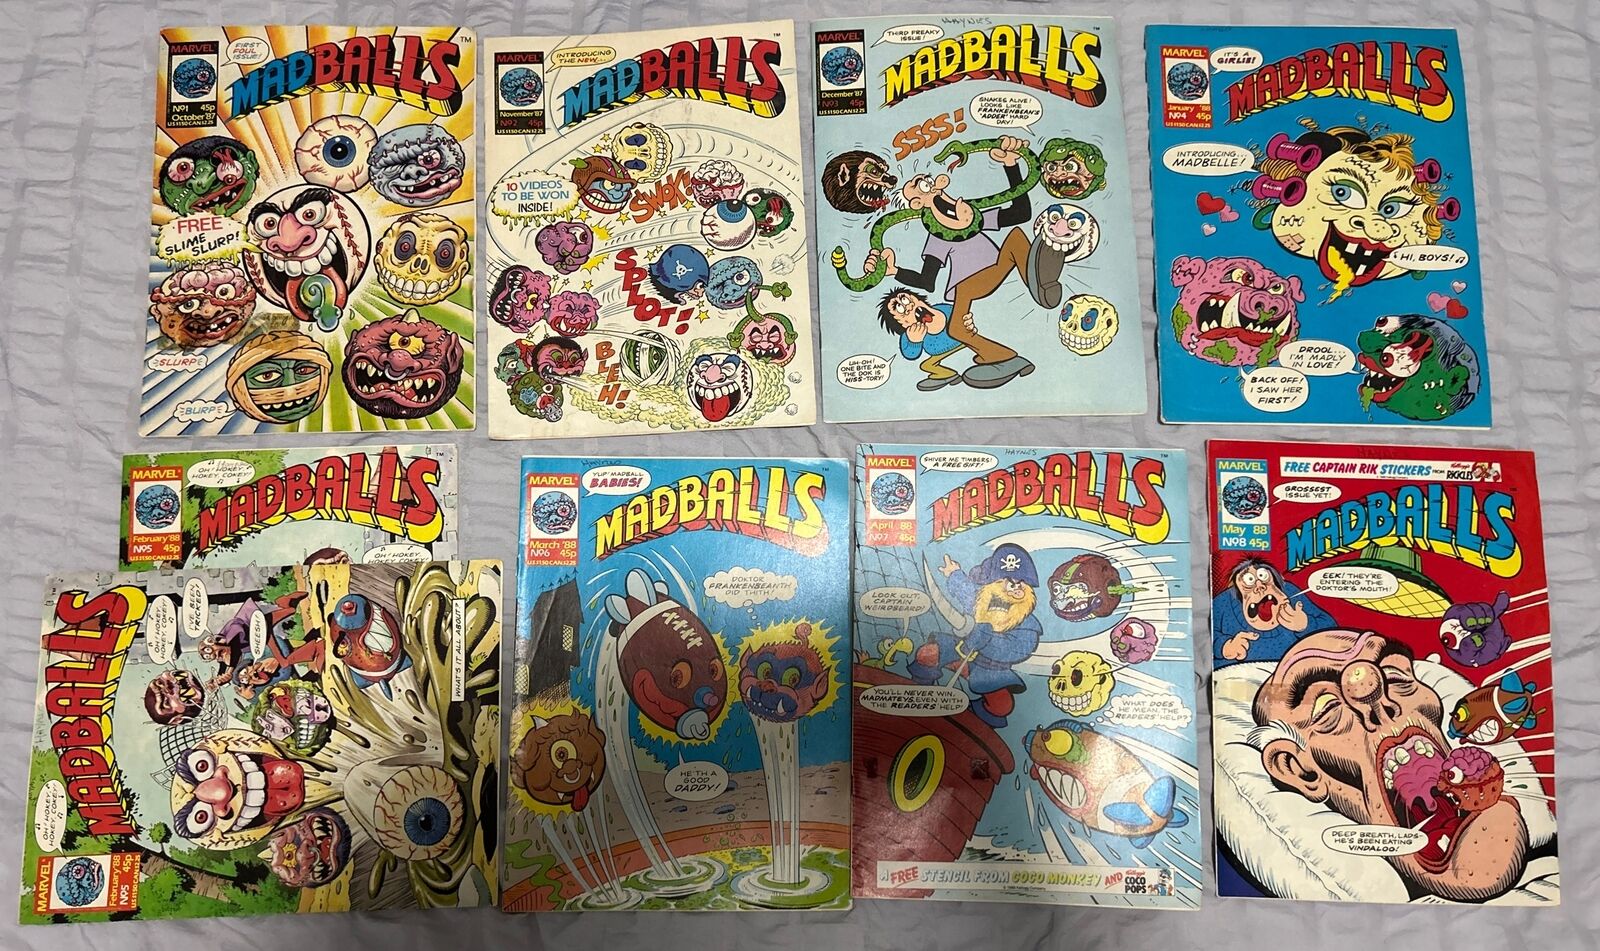 Madballs Marvel Comics UK Issues 1-8 1987/88 Buy all, some, individuals. MSG ME.